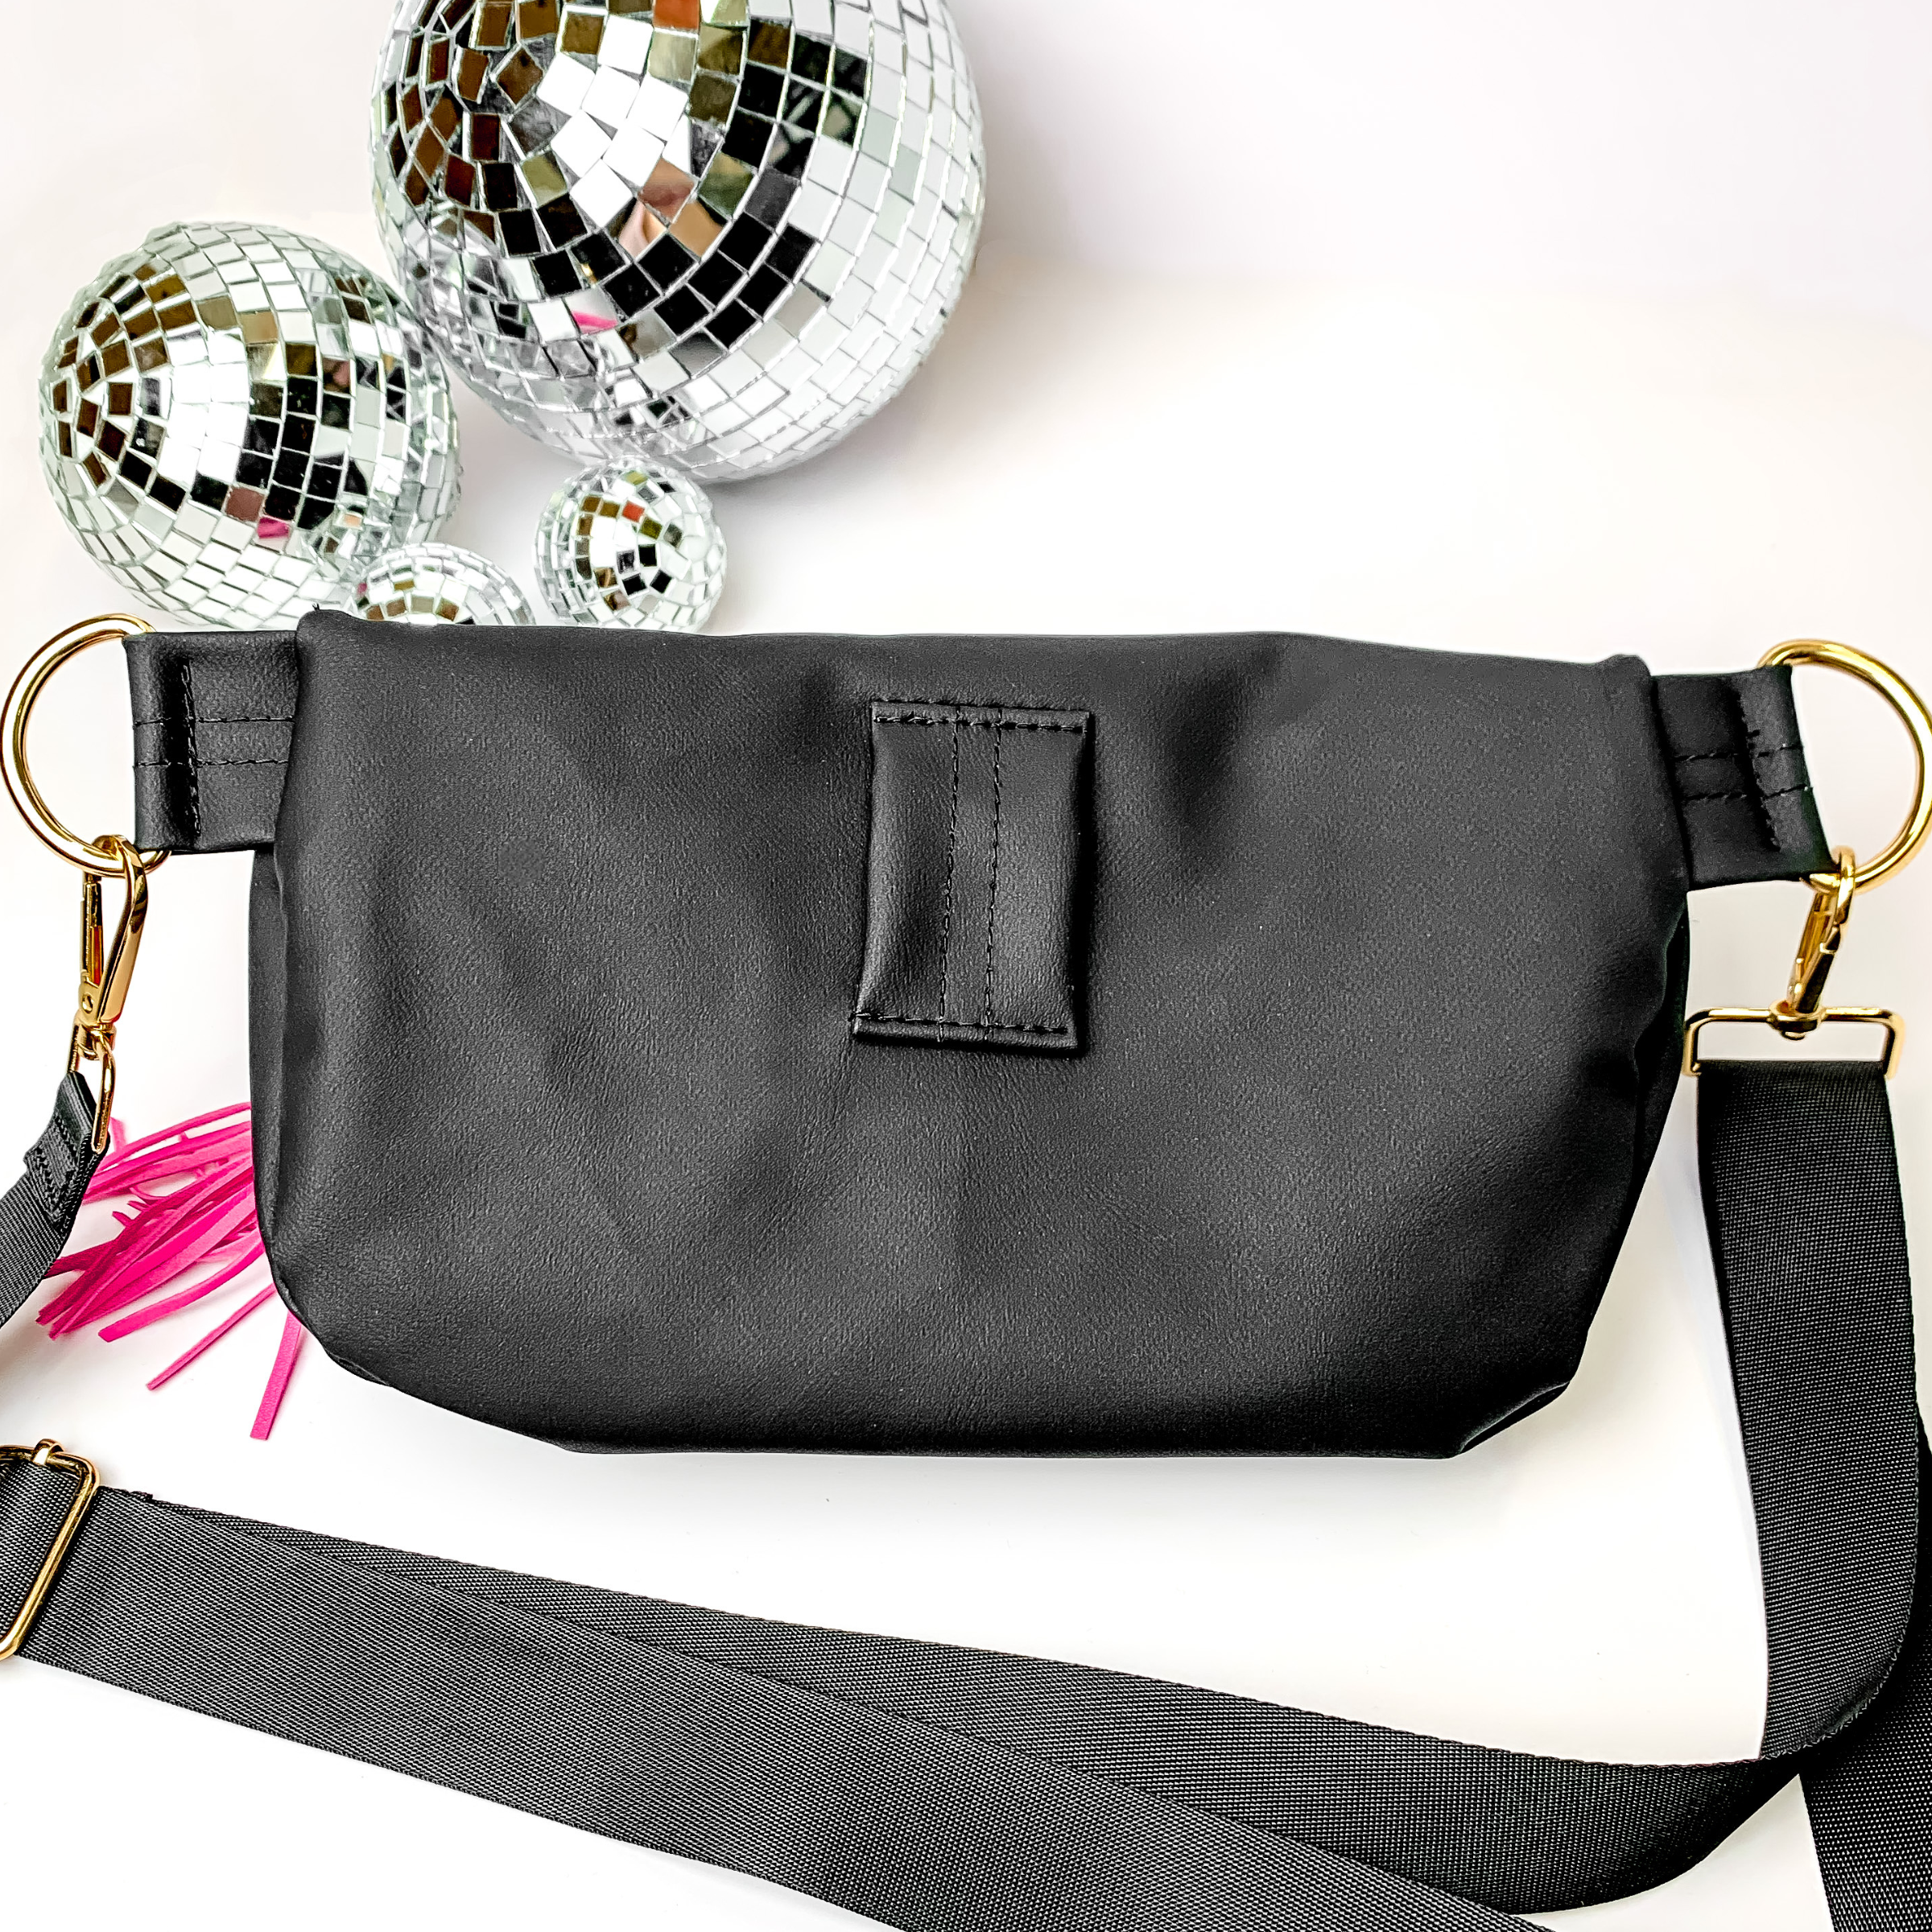 Makeup Junkie | Onyx Sidekick with Adjustable Strap in Black - Giddy Up Glamour Boutique